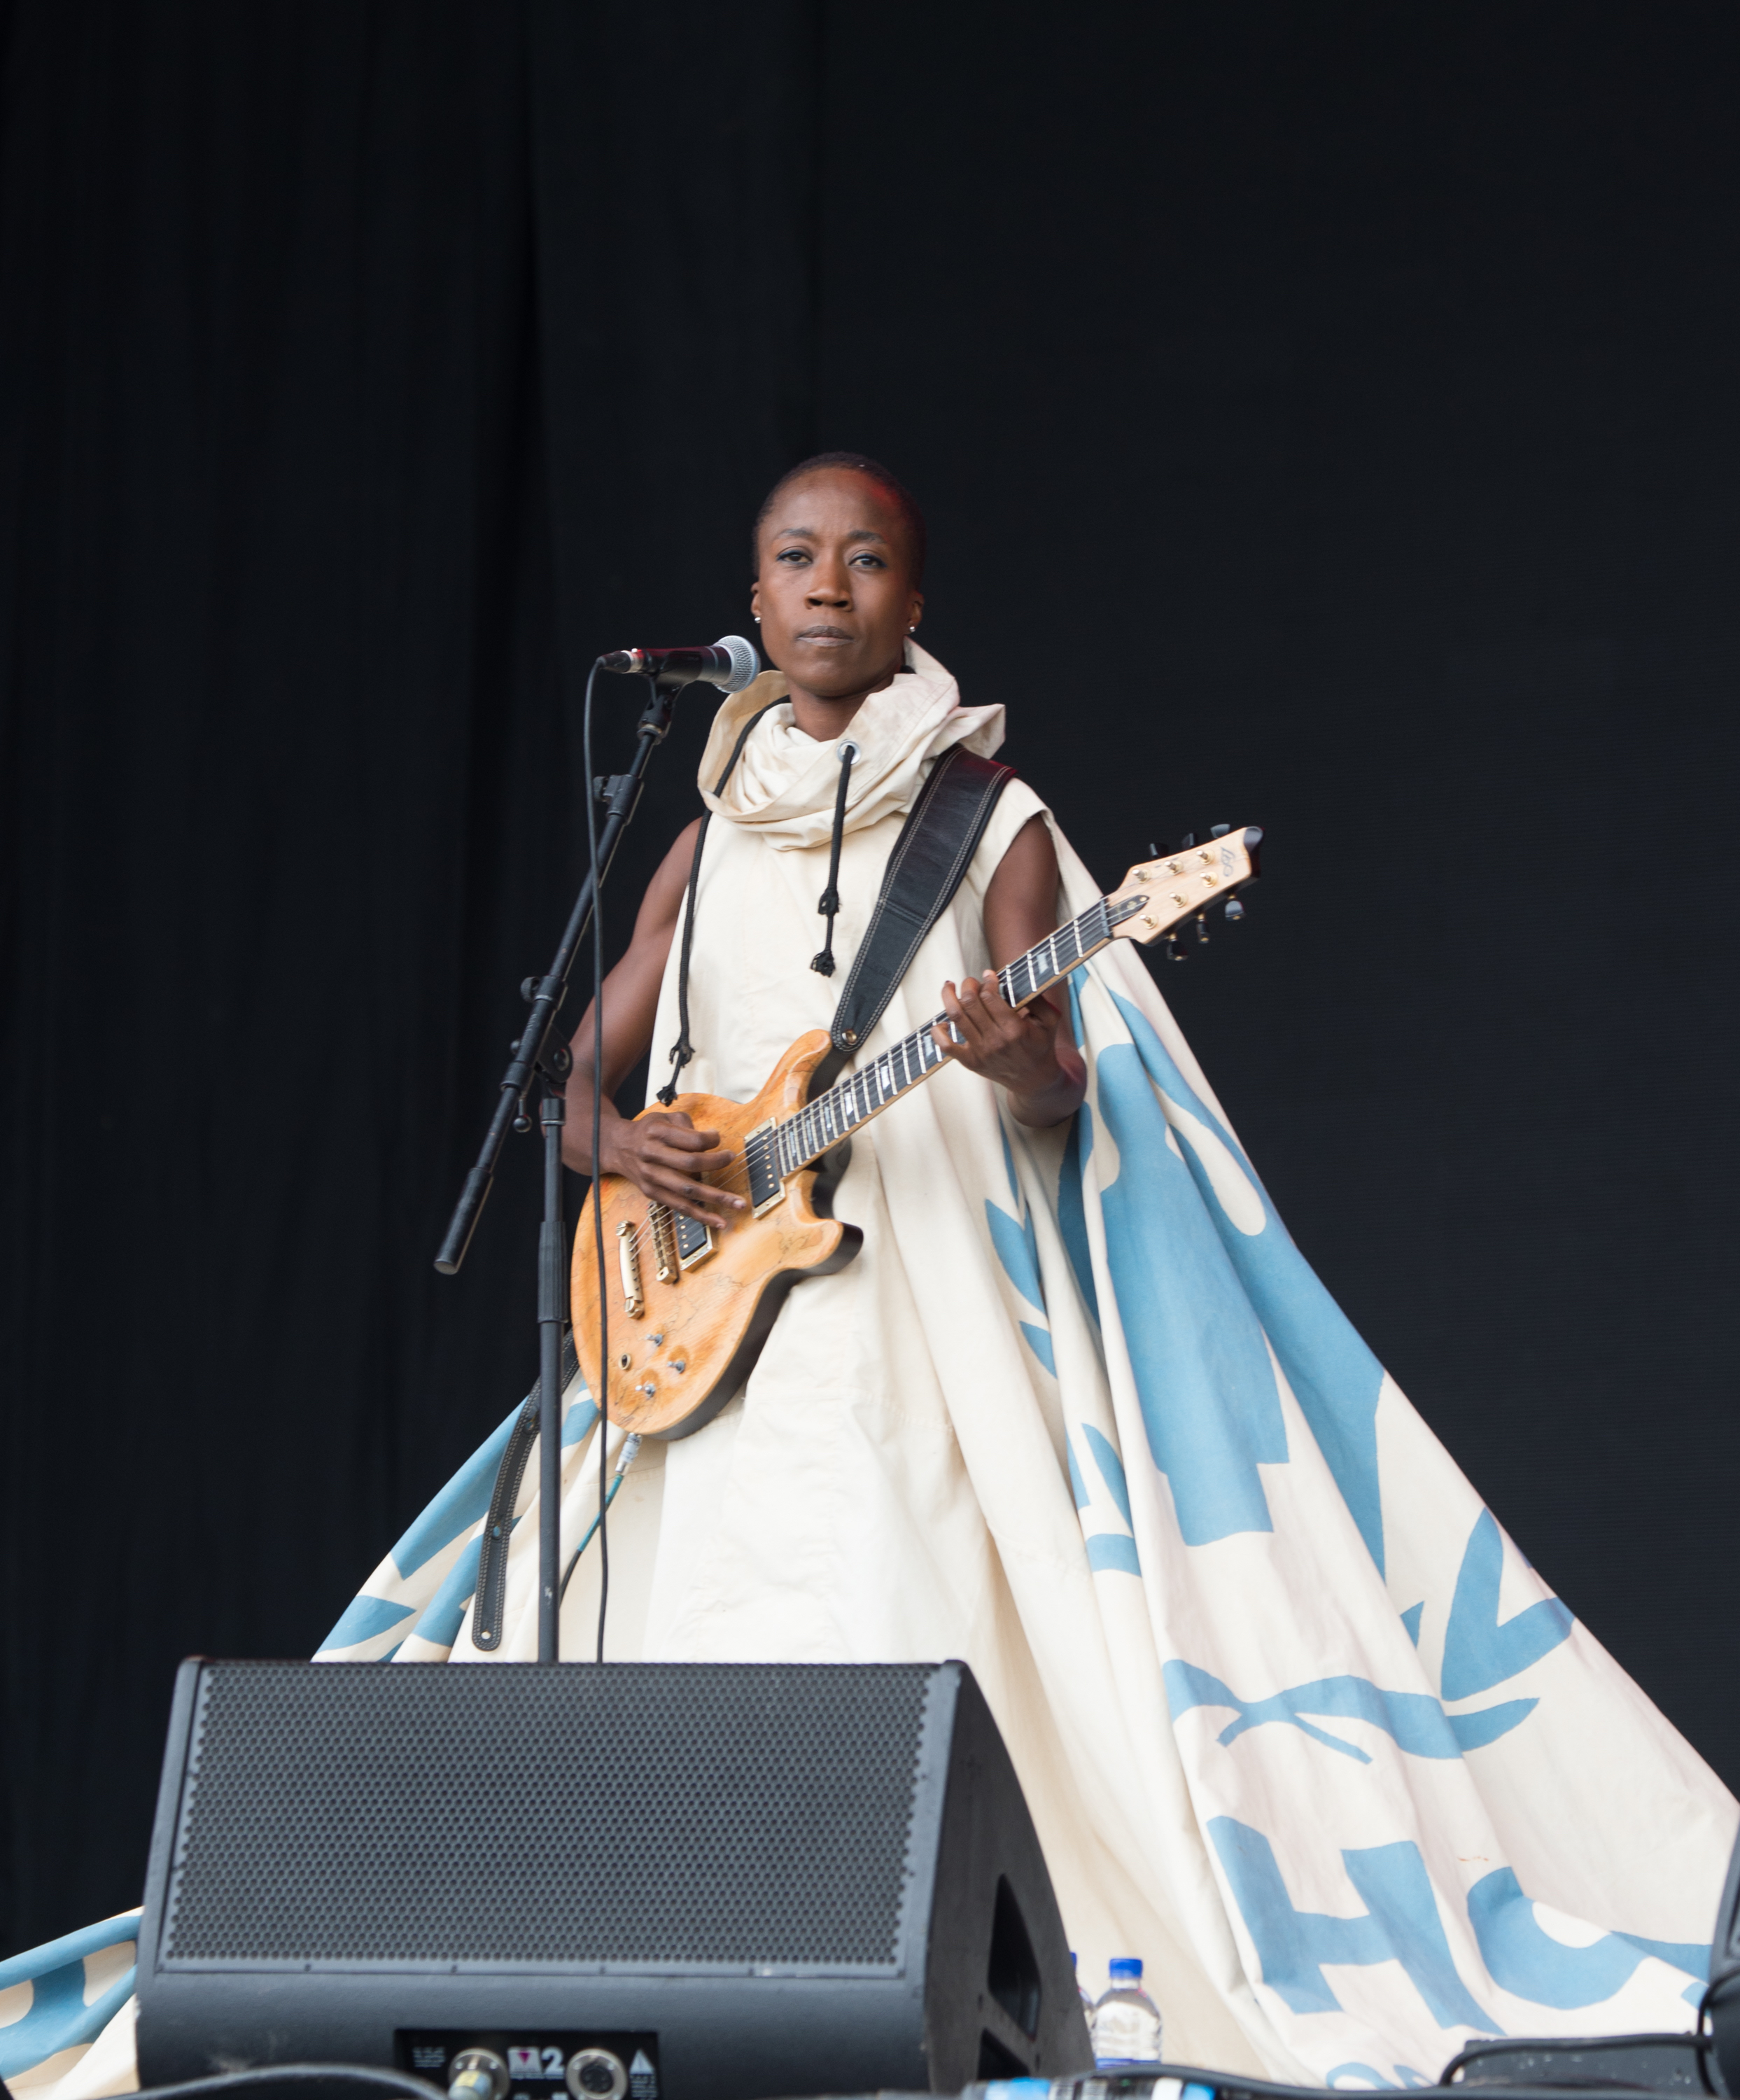  Rokia Traore opening on Pyramid Stage at Glastonbury 2016. Image by kind permission of Getty Images 